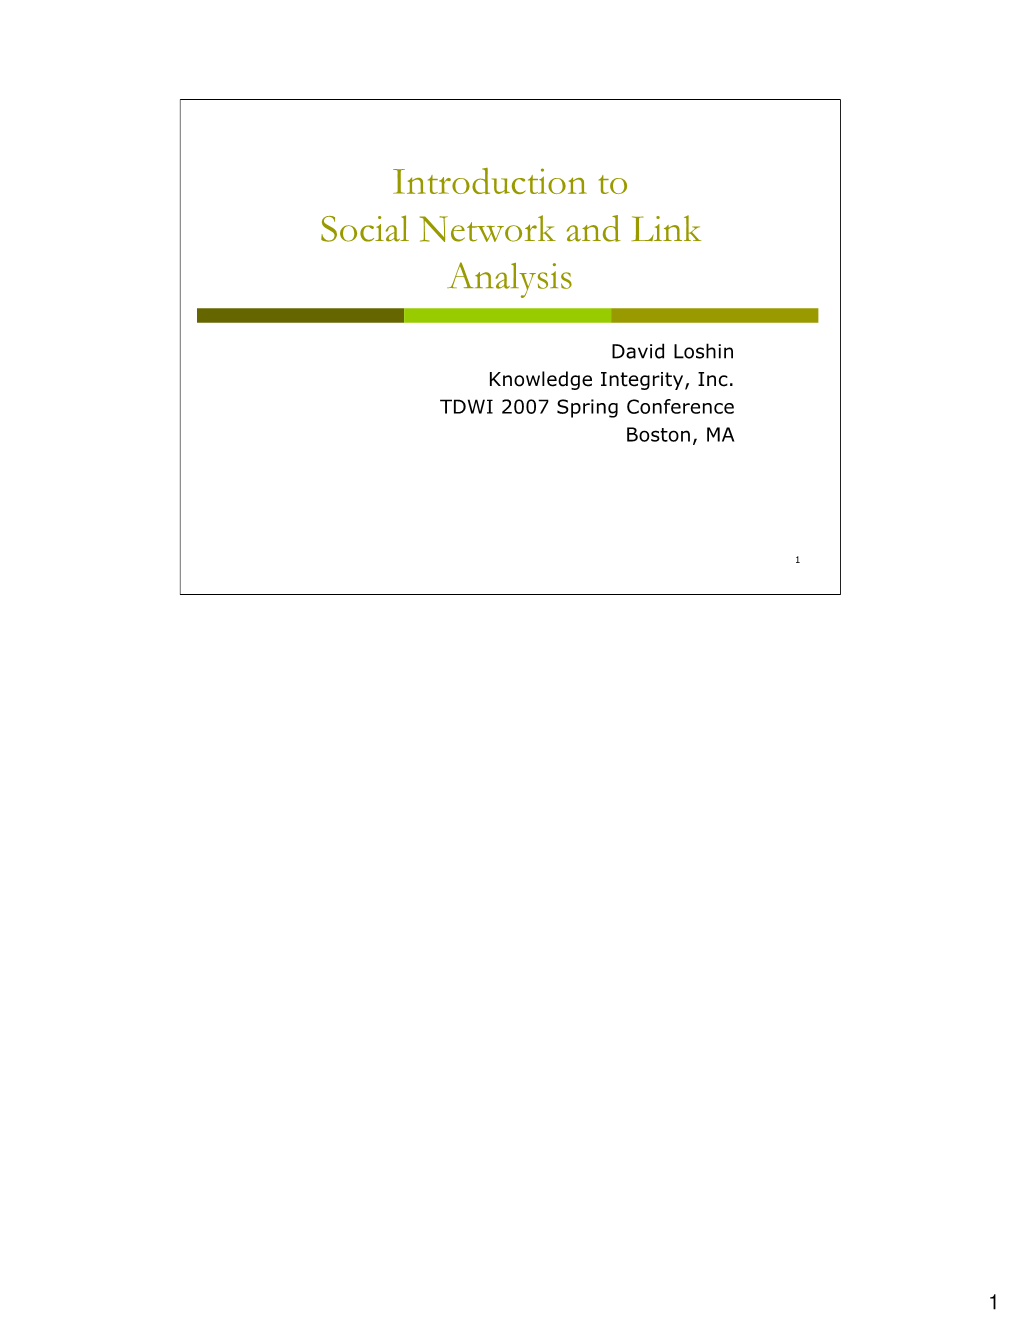 Introduction to Social Network and Link Analysis